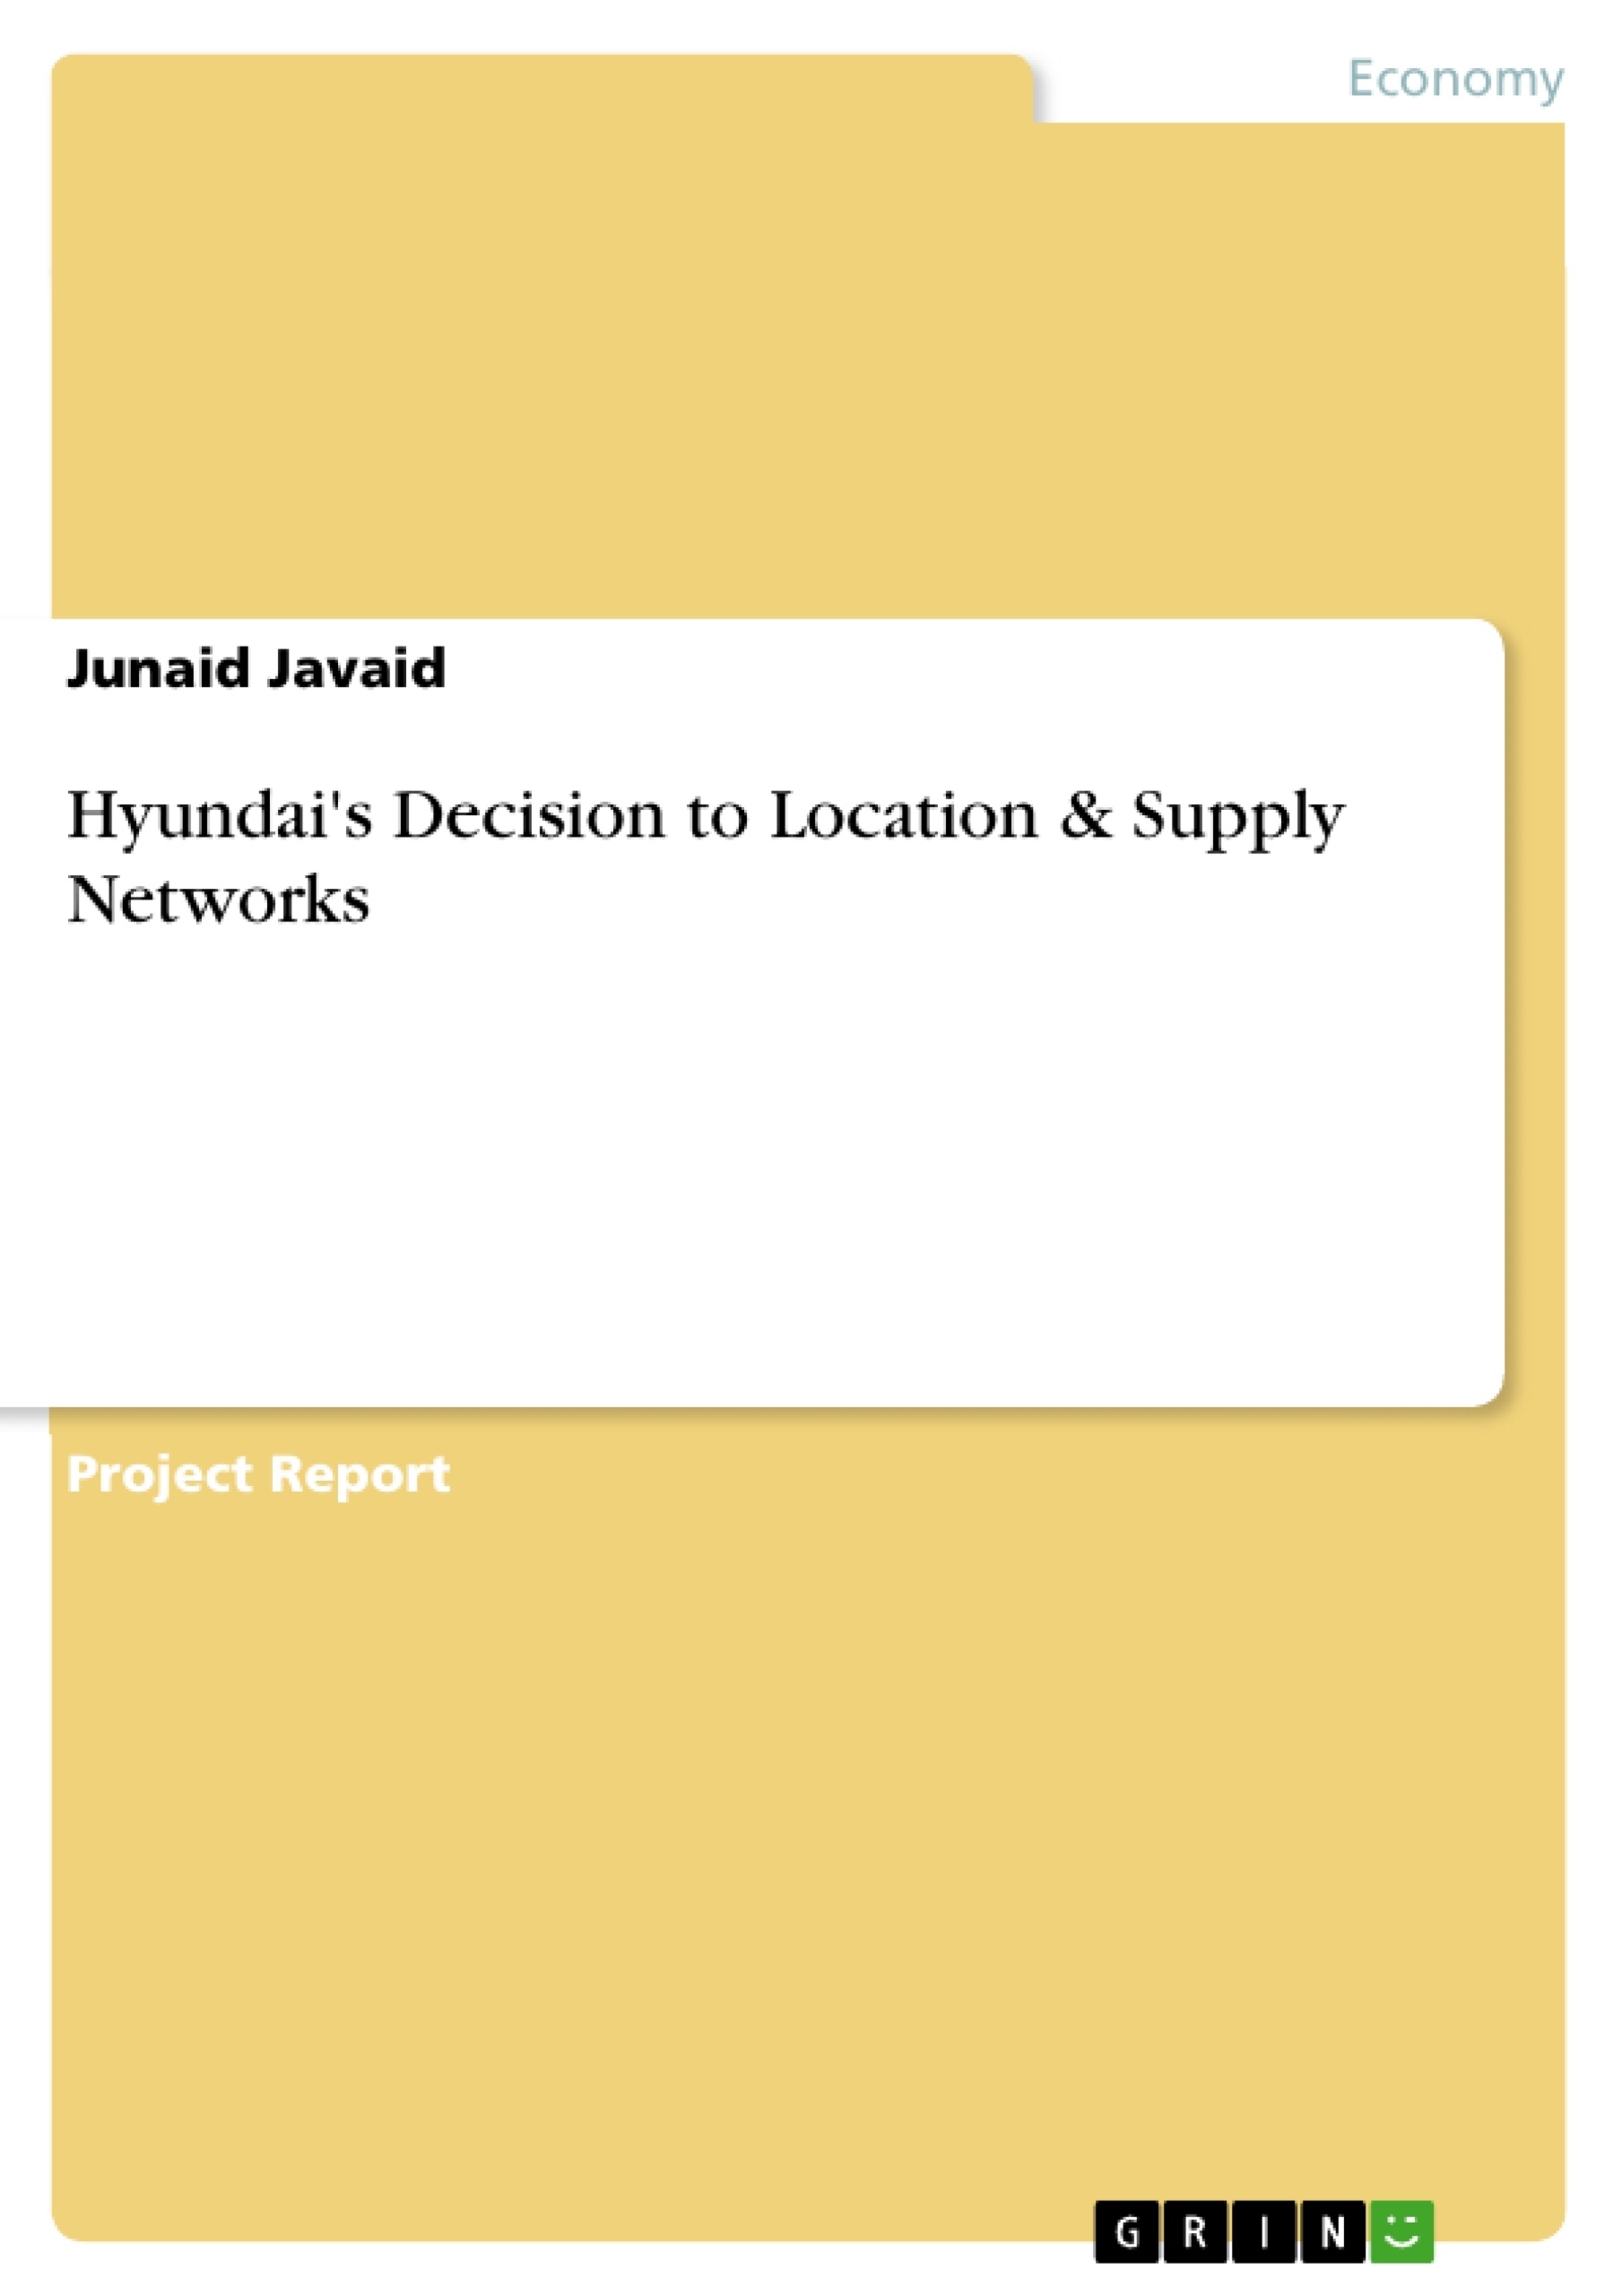 Title: Hyundai's Decision to Location & Supply Networks